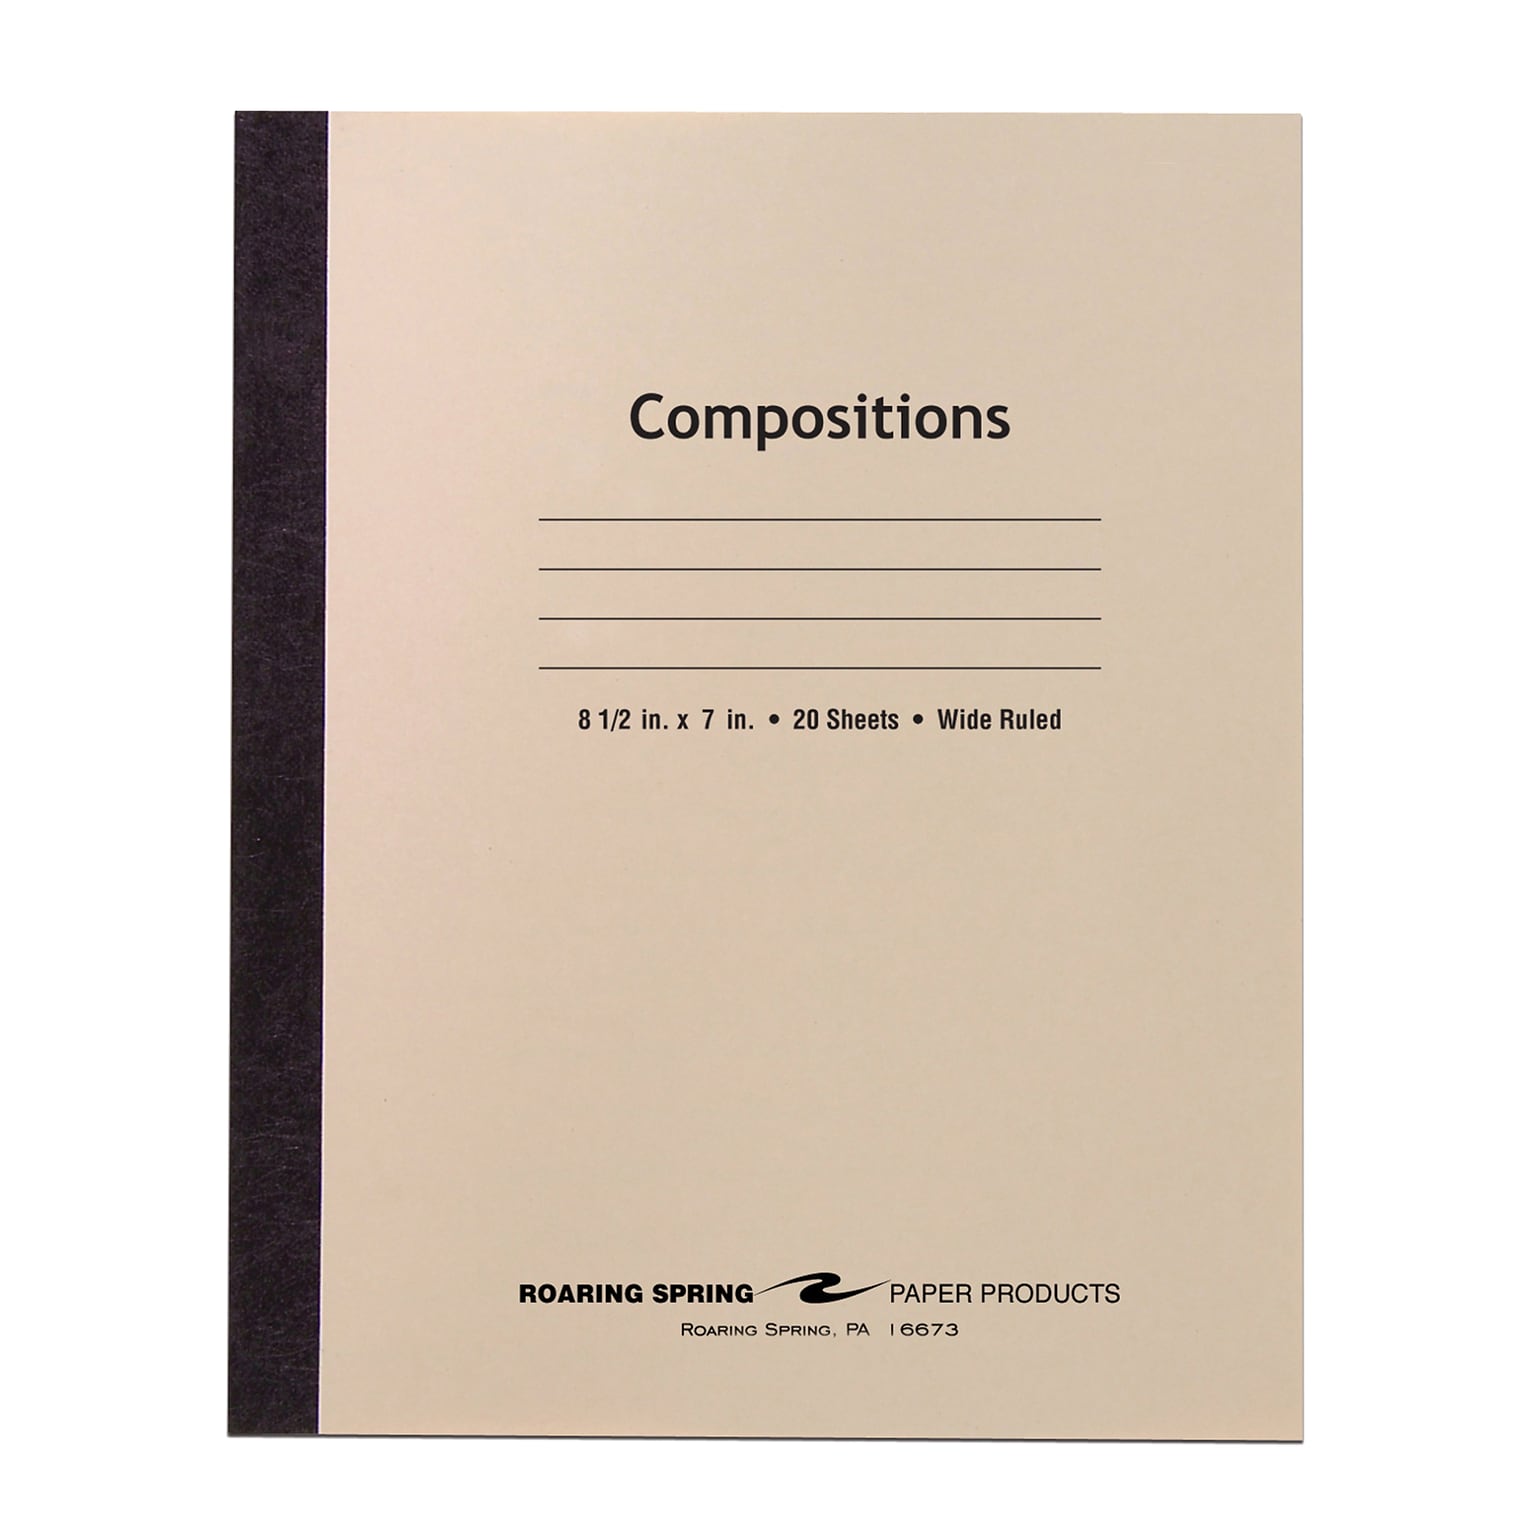 Roaring Spring Paper Products Composition Notebooks, 7 x 8.5, Wide Ruled, 20 Sheets, Manila (77340)